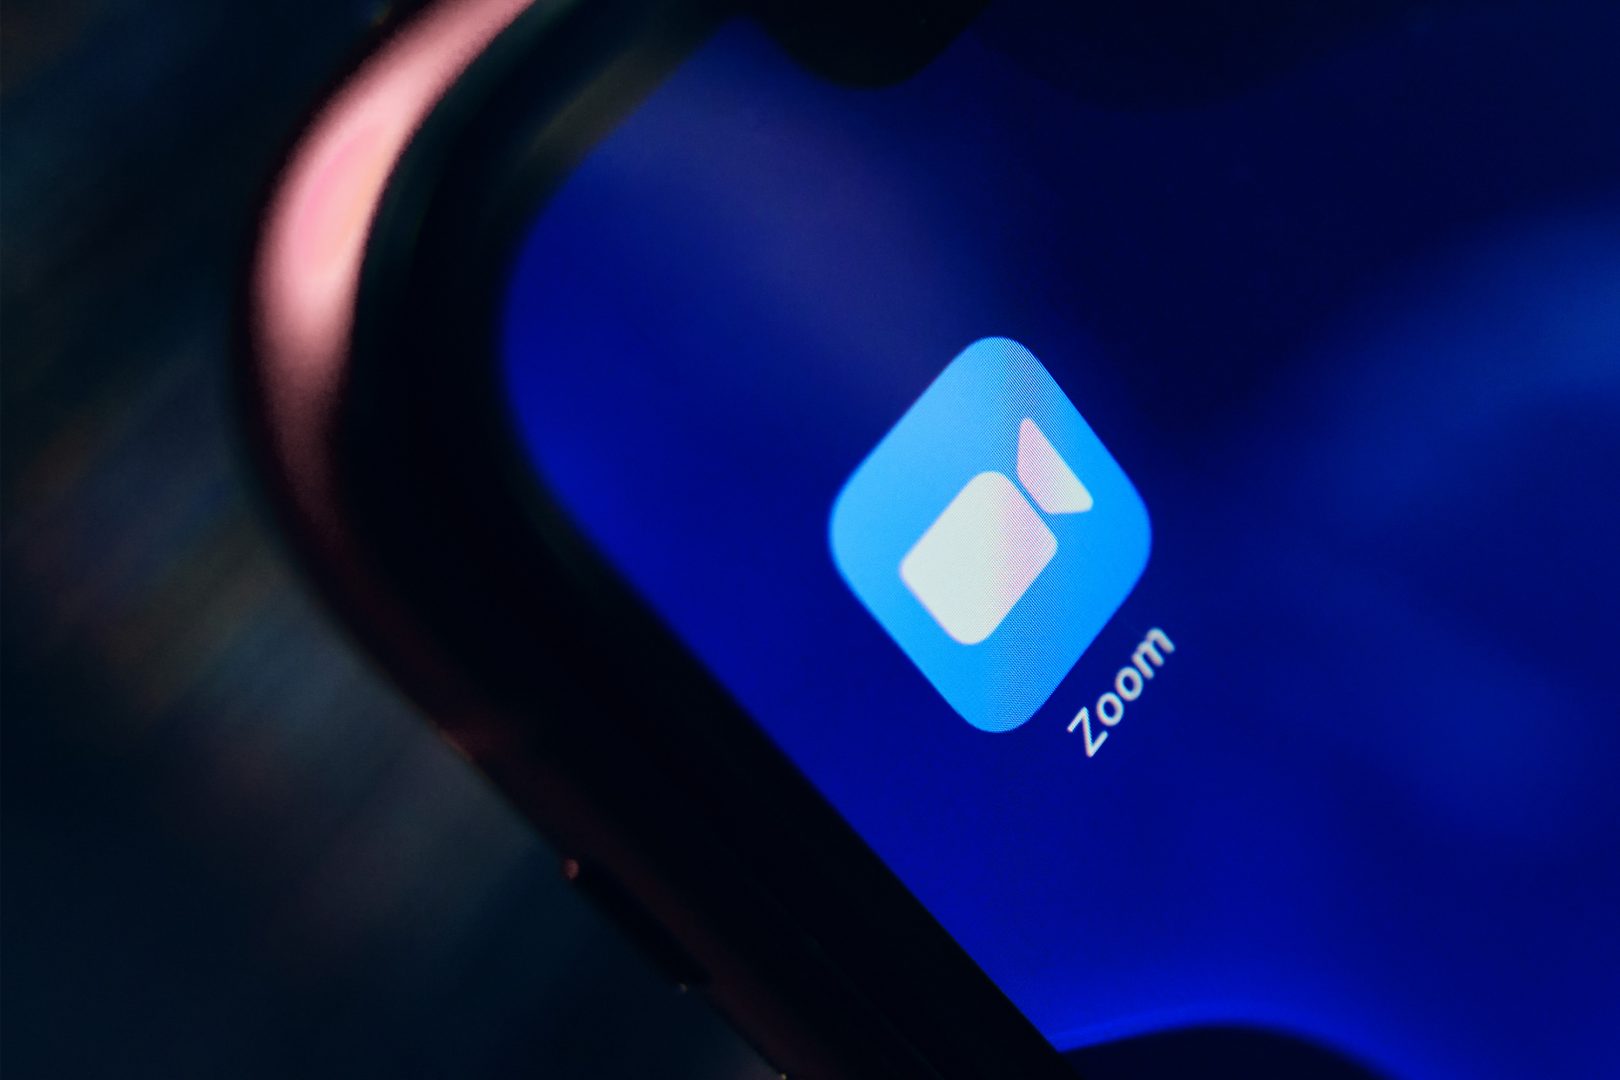 The app icon for the video-conferencing app Zoom is featured on a phone screen held in the hand of an unknown person.